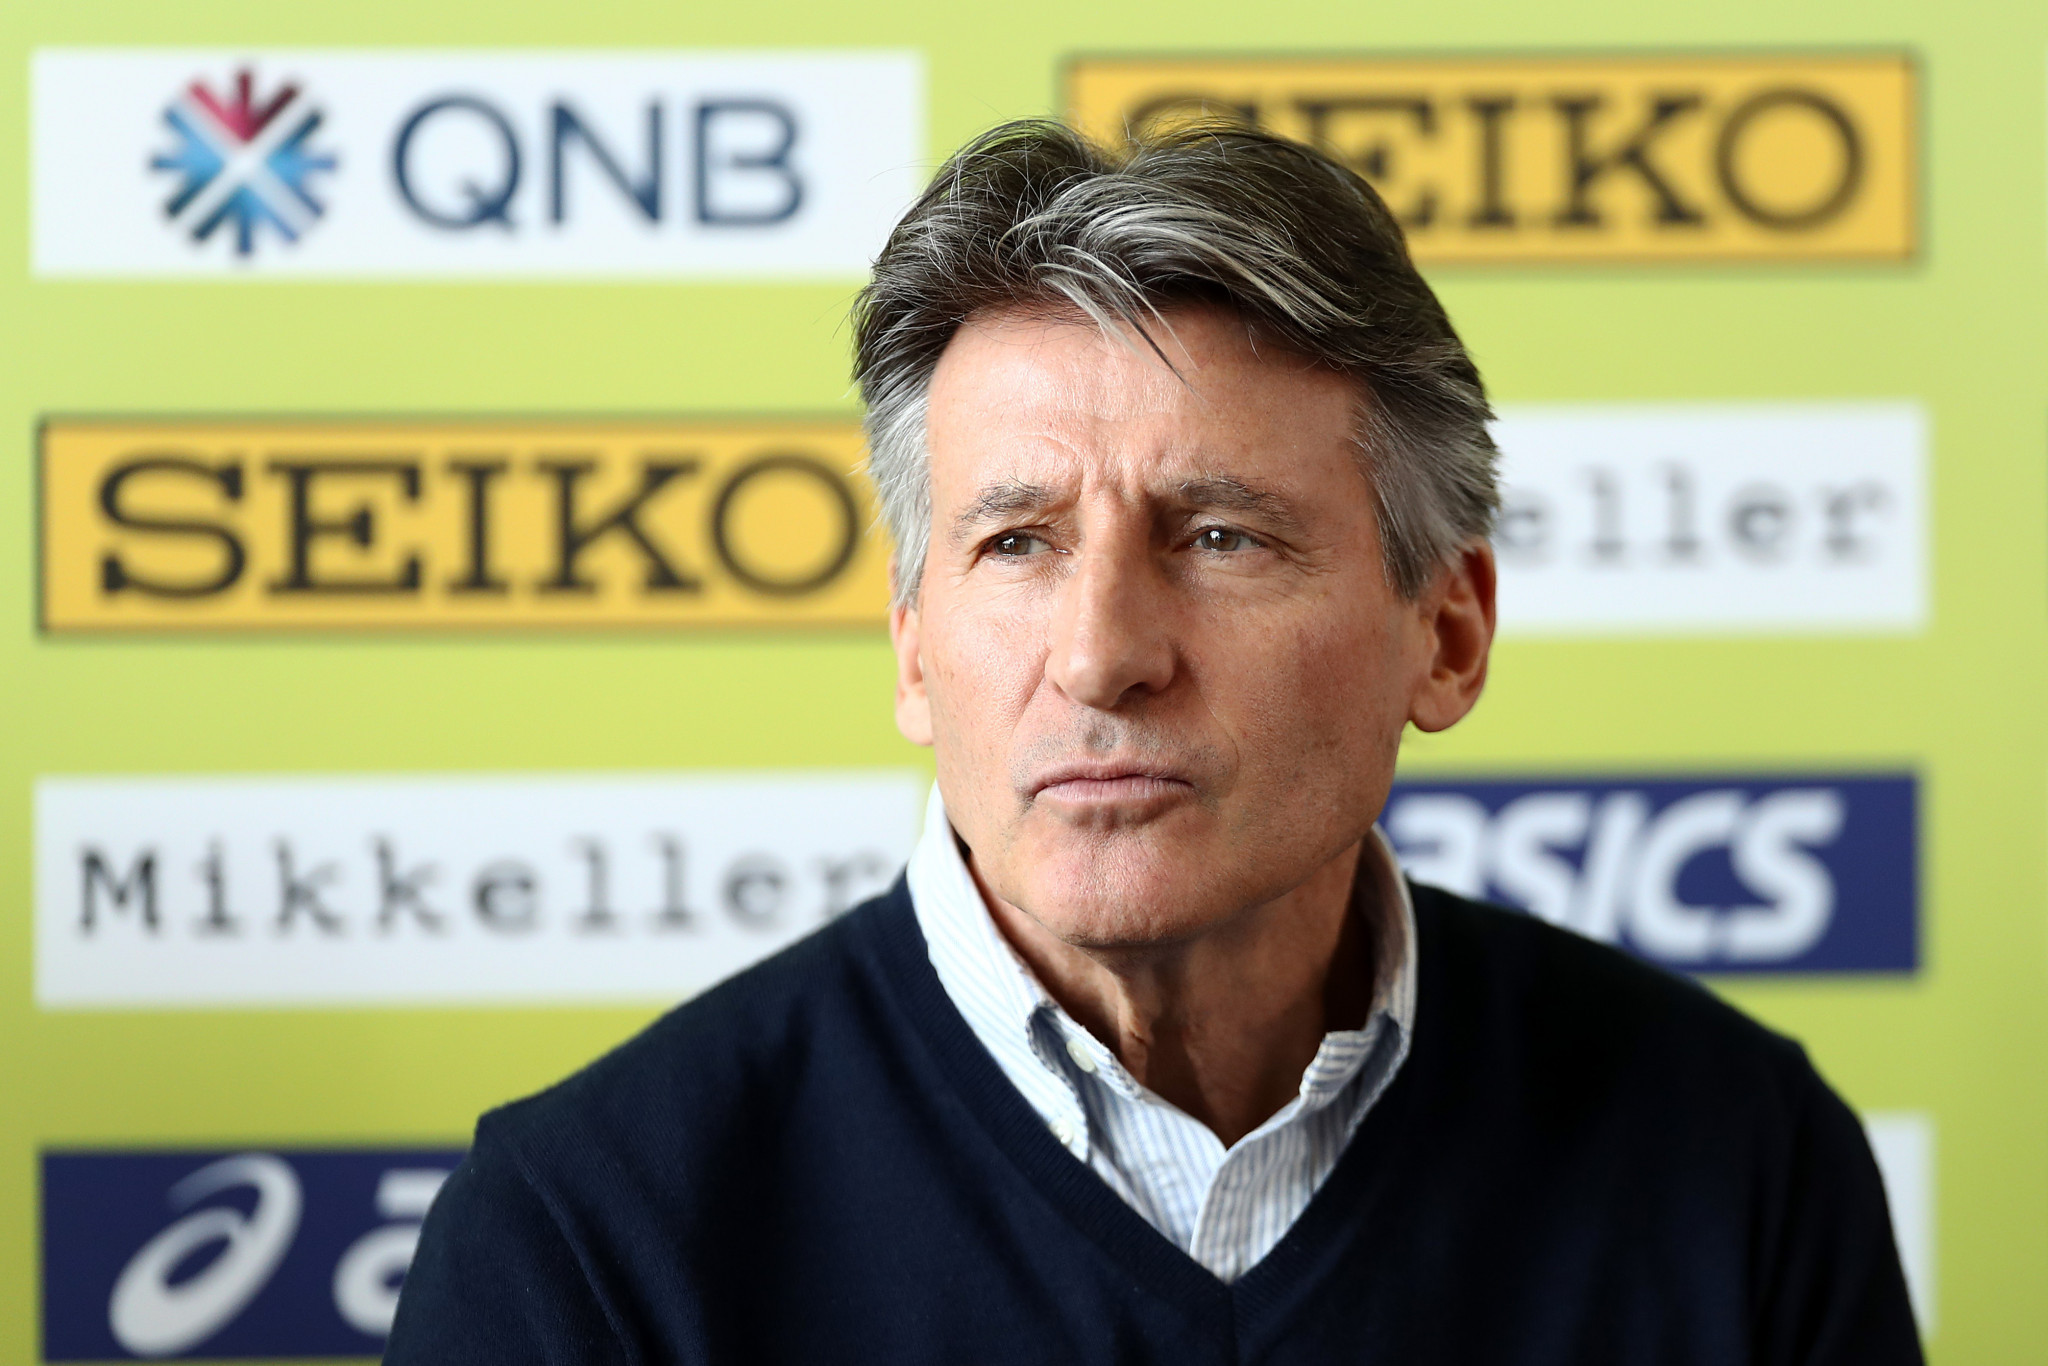 Athletics South Africa has accused Sebastian Coe and the IAAF of breaching confidentiality agreements related to the Caster Semenya case ©Getty Images